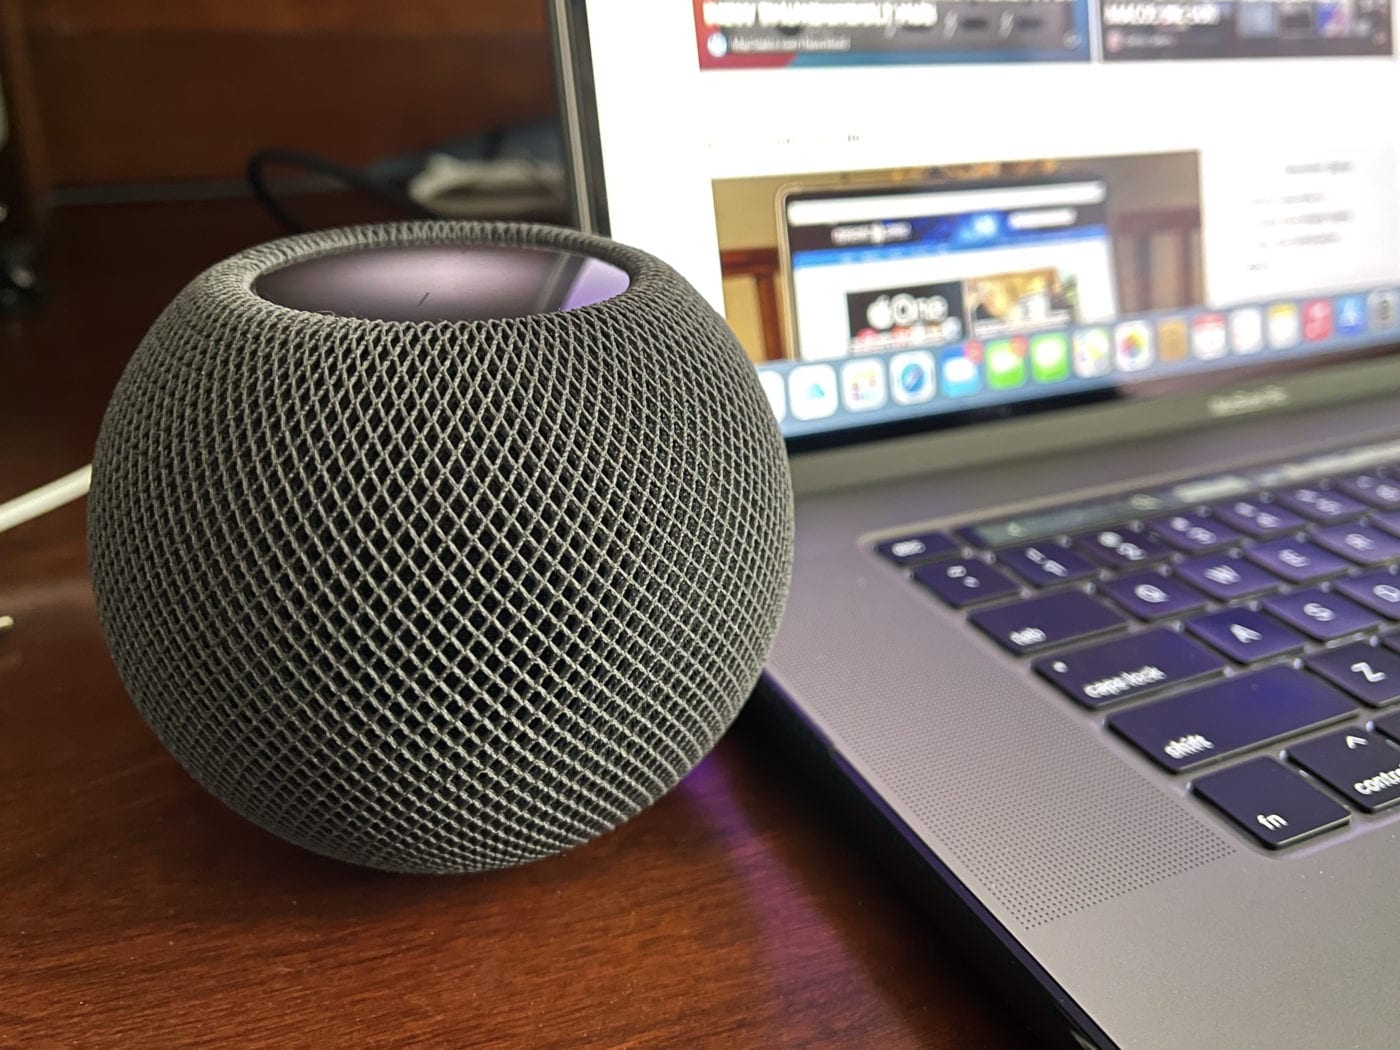 The HomePod mini in Space Gray. Photo by Steven Sande